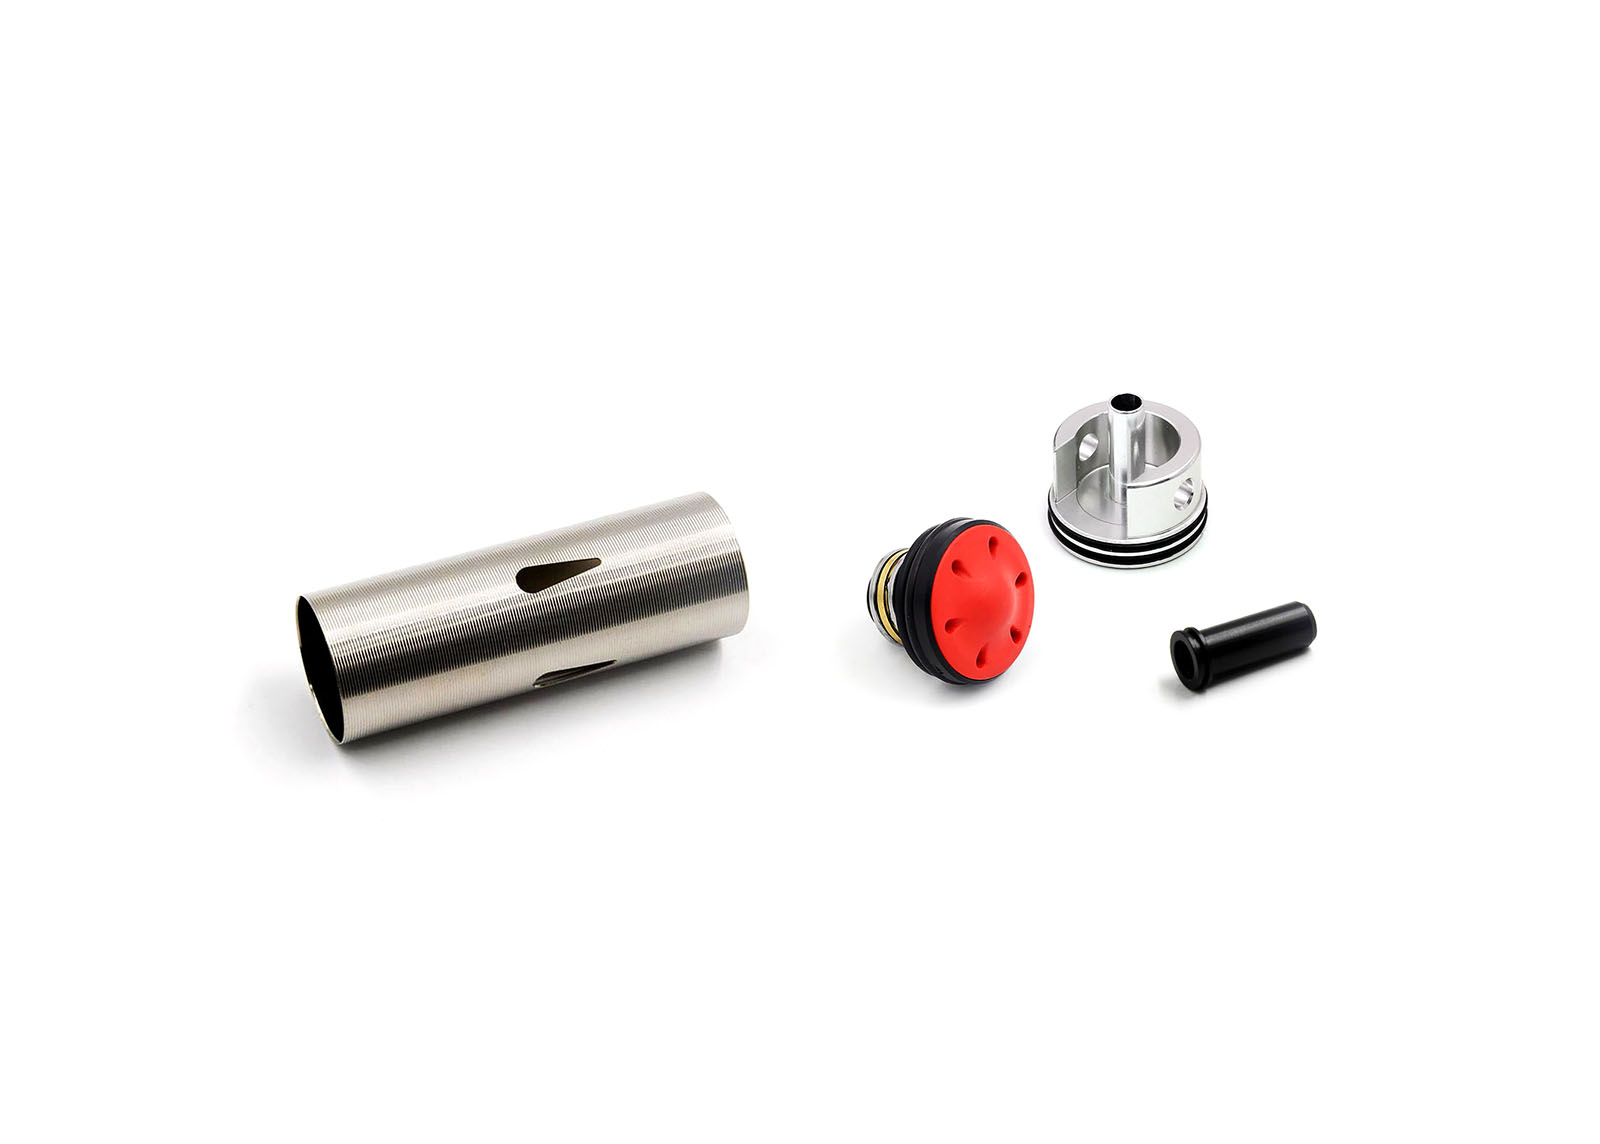 Bore-Up Cylinder Set for MP5K/PDW (CA Type) - Modify AEG Airsoft parts